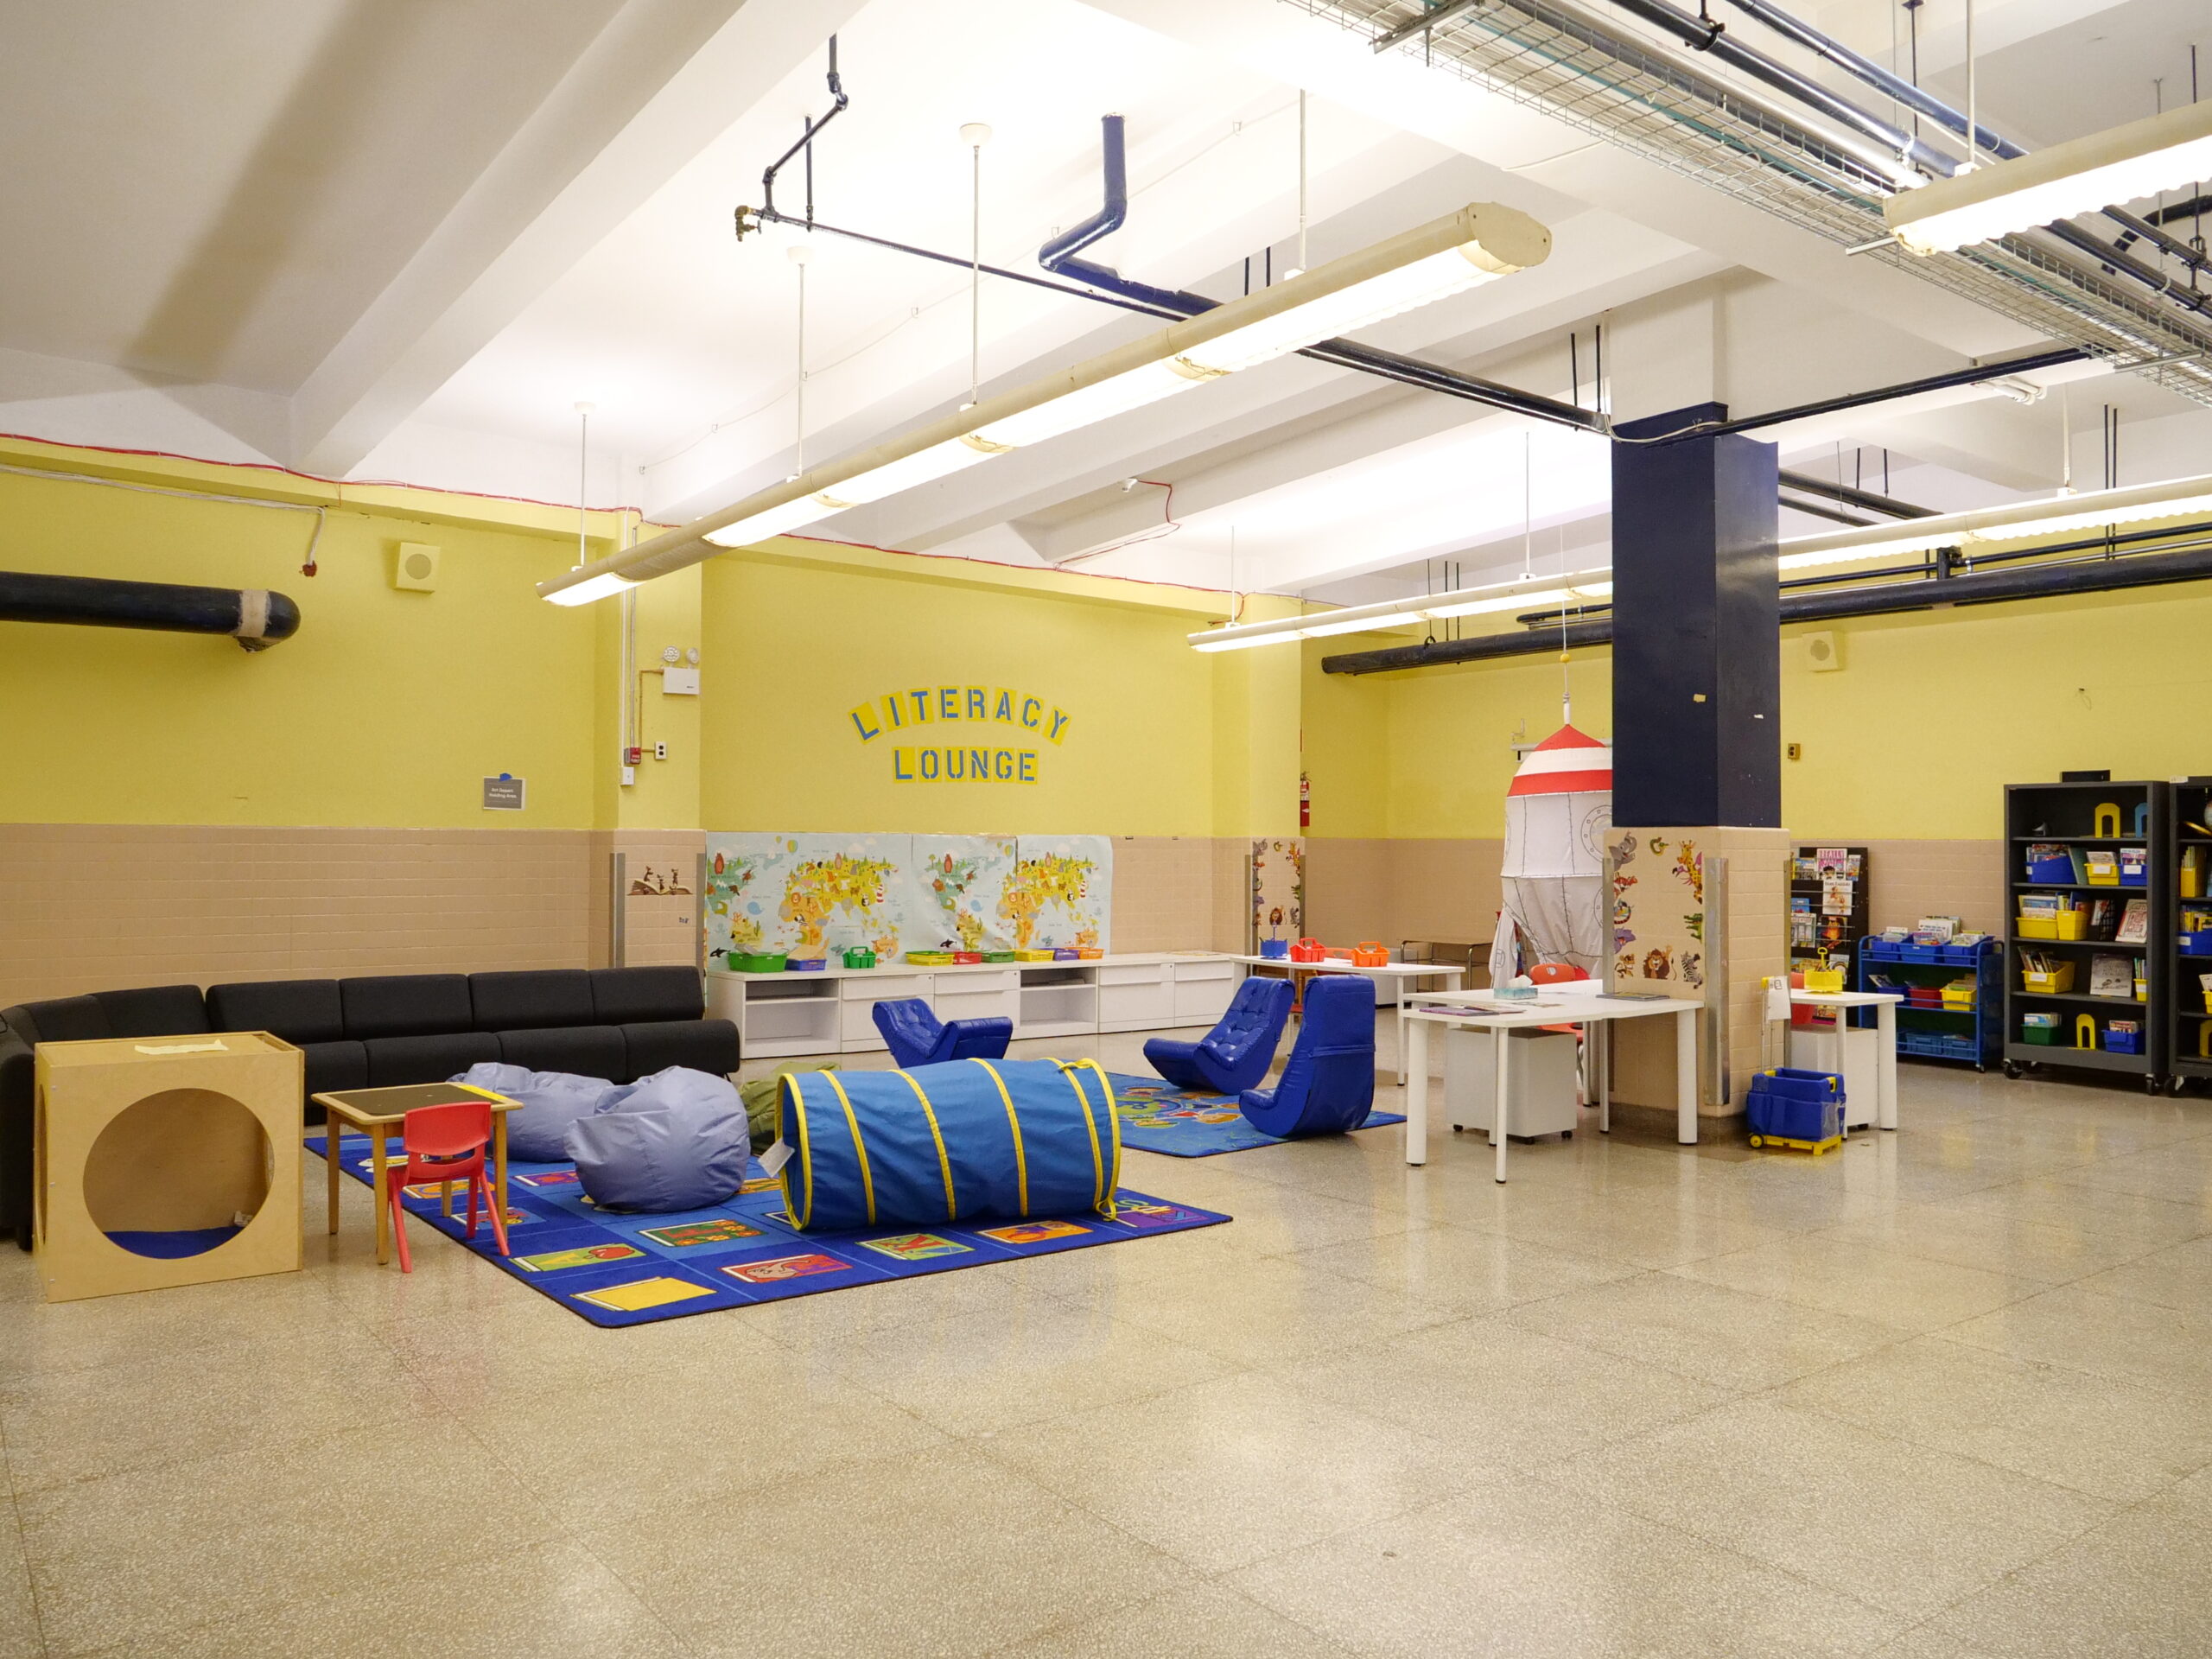 On a cafeteria wall, a sign is painted Literacy Lounge. There is a long couch, rugs, flexible seating, tents, beanbags, desks, and a writing center topped with baskets of paper and supplies.